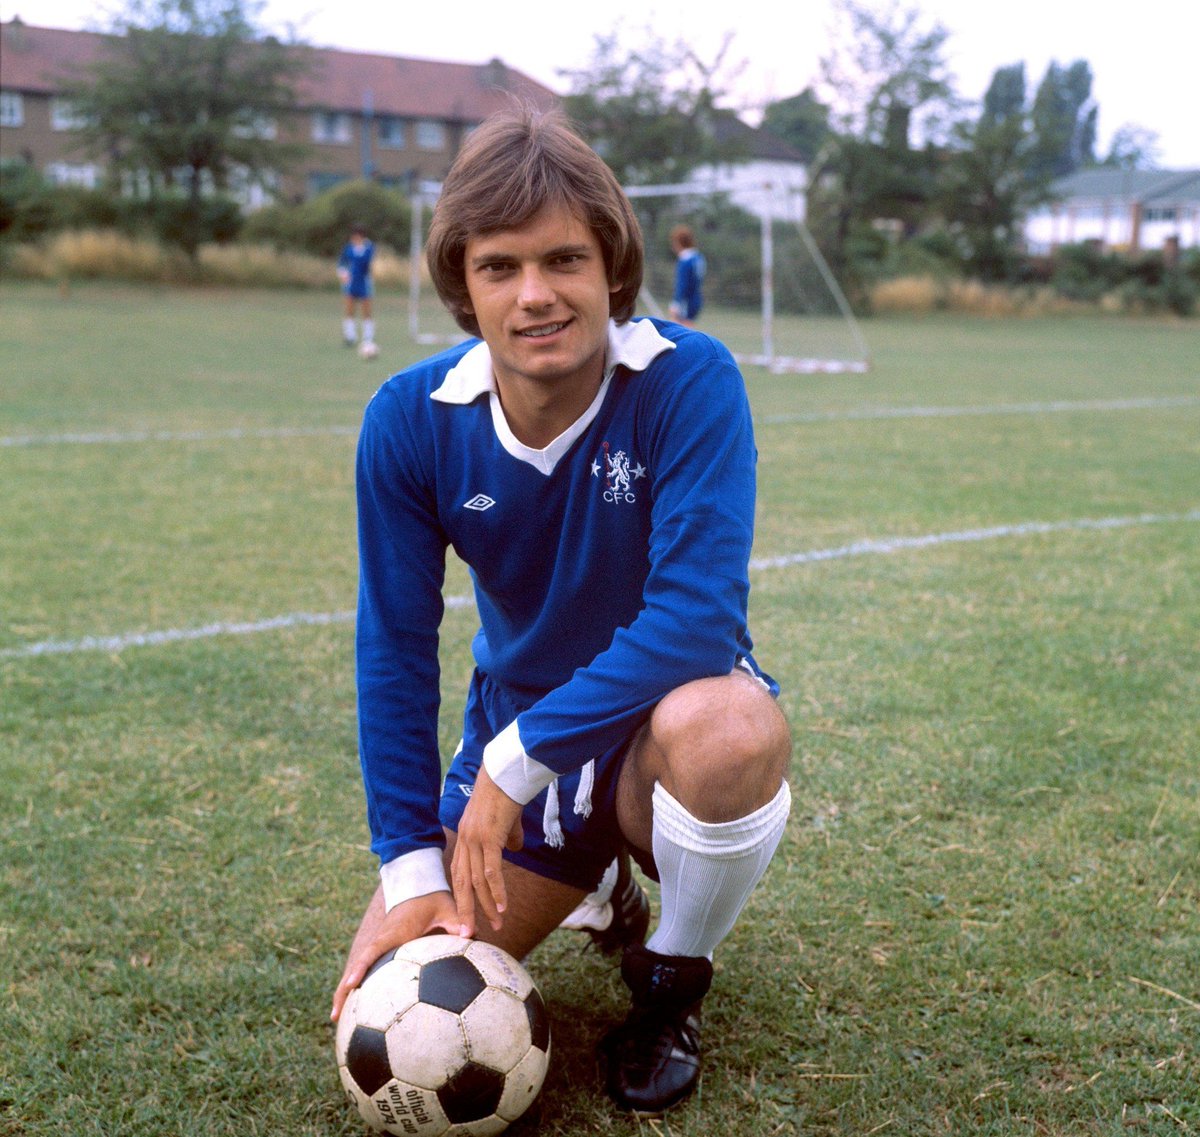 CHELSEA REWIND: 6 years ago today we sadly lost Ray Wilkins. 'They don't make them like Ray anymore' Continue to rest in peace. #Legend #KTBFFH 🙏